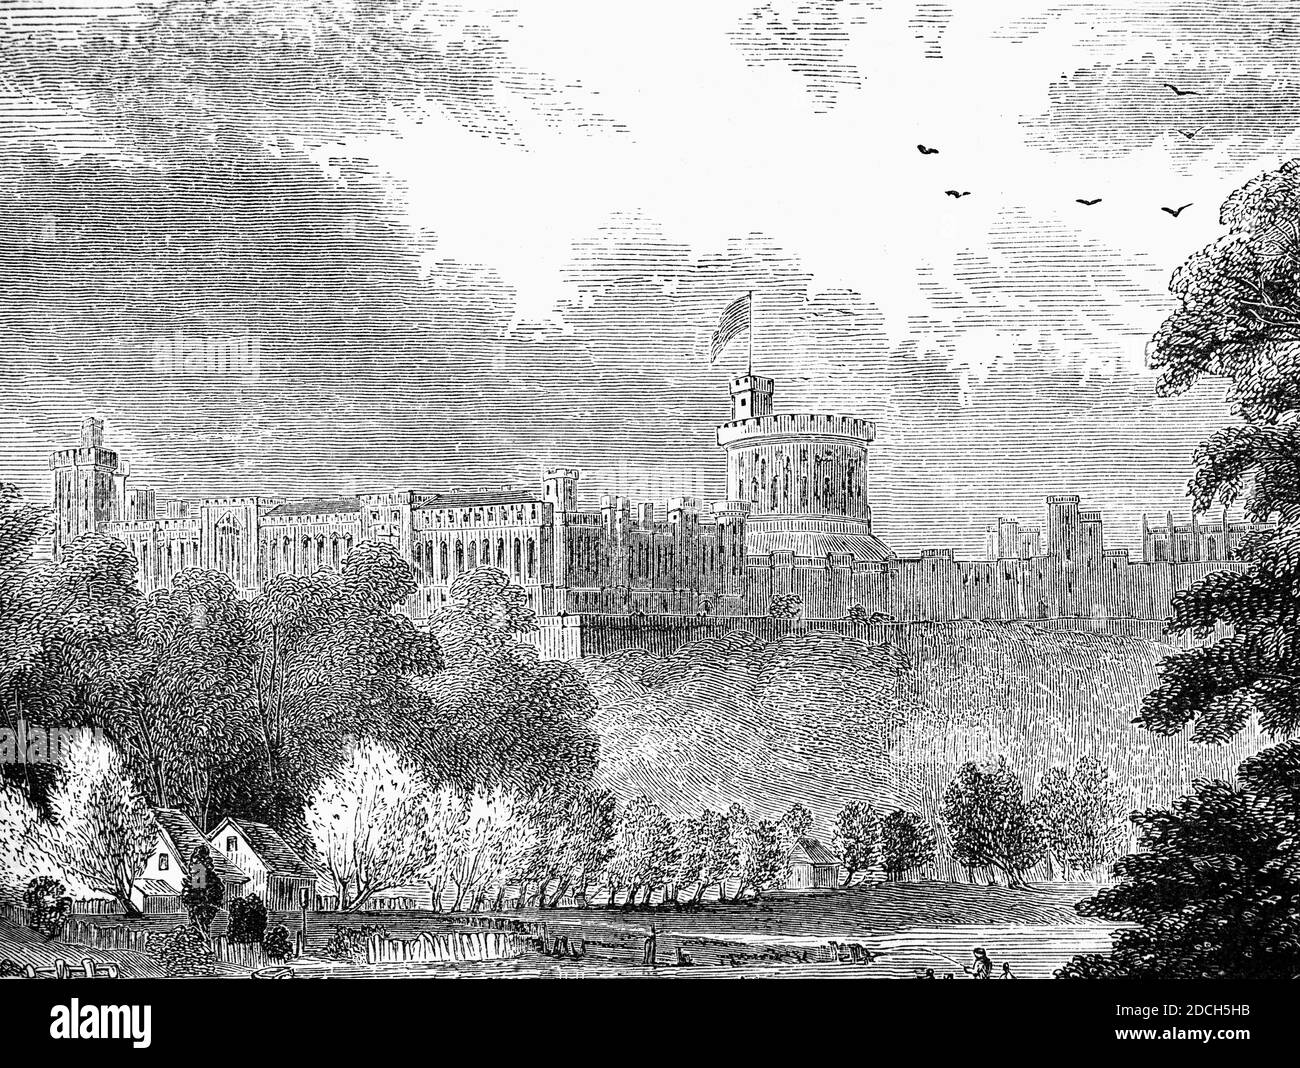 A 19th Century view across the River Thames of Windsor Castle originally built in the 11th century after the Norman invasion of England by William the Conqueror. Since the time of Henry I, it has been used by the reigning monarch and is the longest-occupied palace in Europe, Berkshire, England Stock Photo